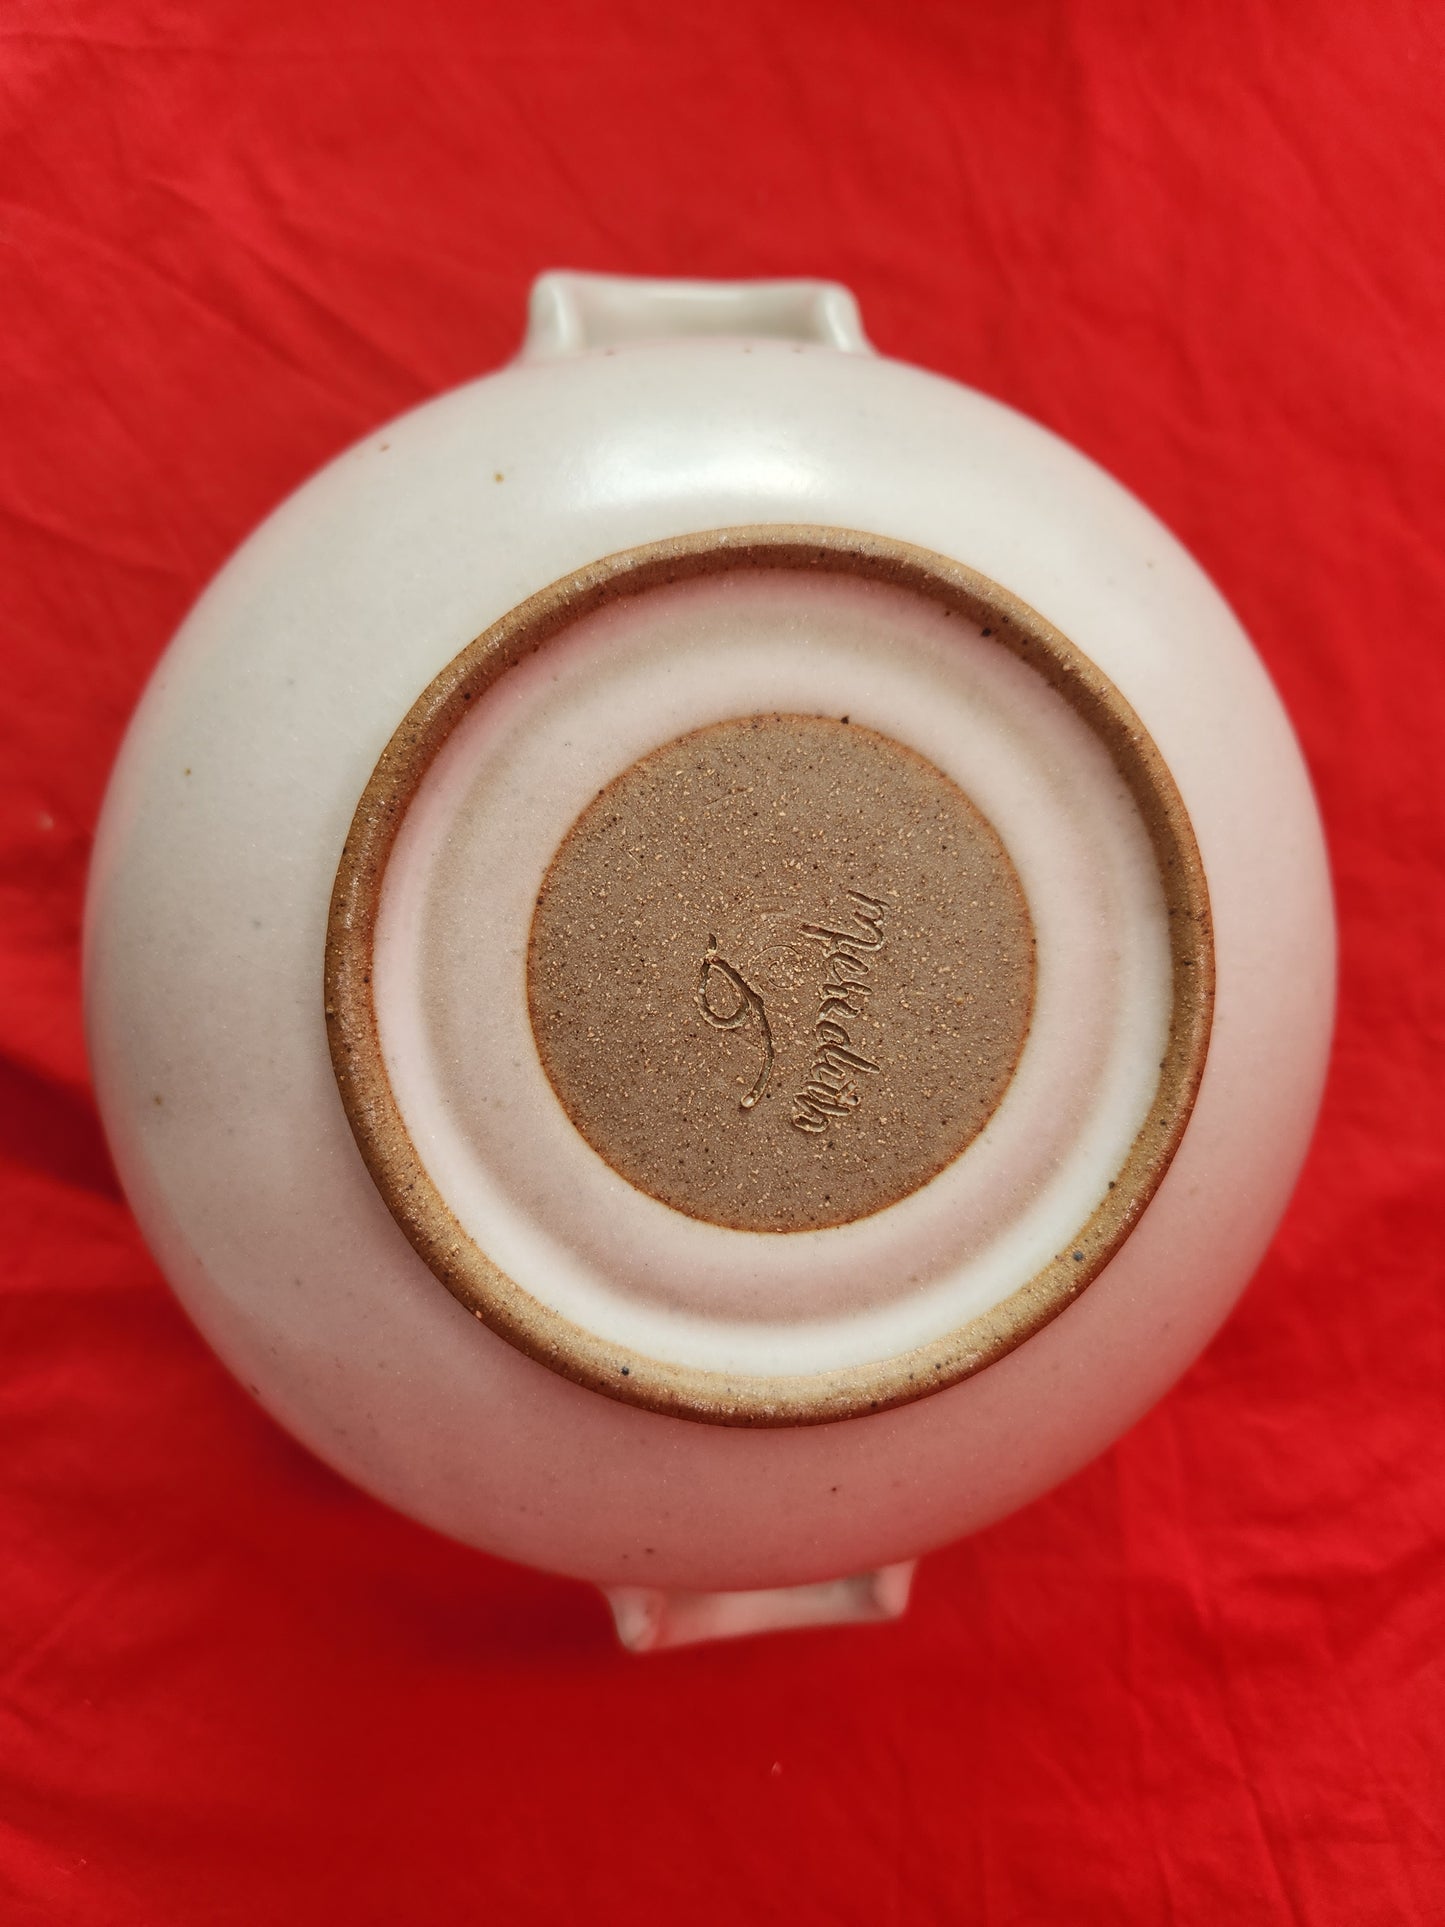 Amazing - Studio Art Pottery White and Brown Stoneware Pot w/Lid & Ladle - signed by Artist